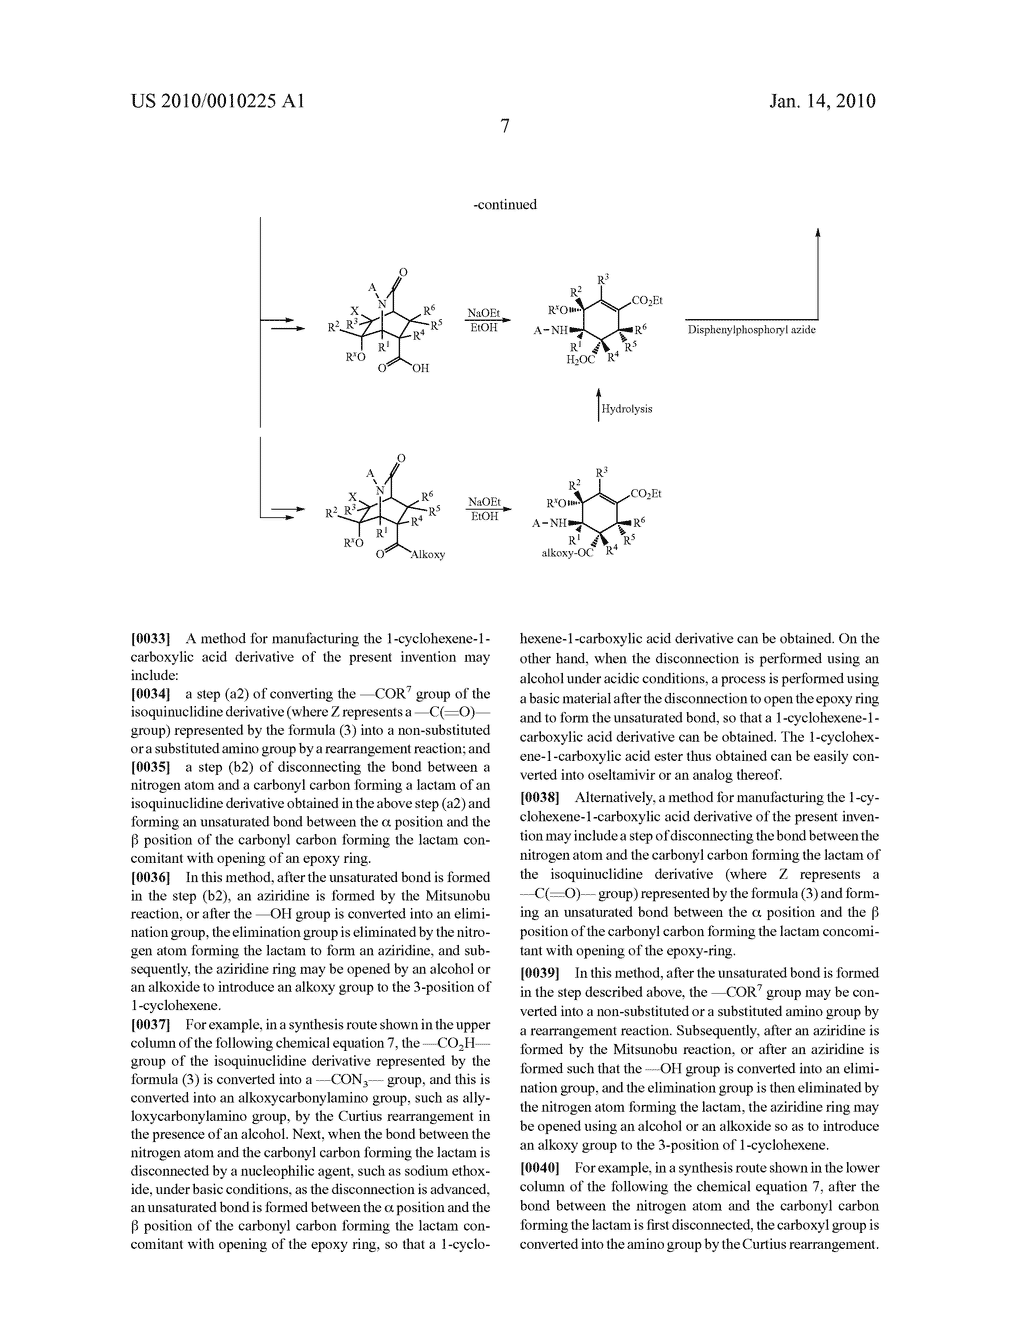 ISOQUINUCLIDINE DERIVATIVE AND METHOD FOR MANUFACTURING 1-CYCLOHEXENE-1-CARBOXYLIC ACID DERIVATIVE USING THE SAME - diagram, schematic, and image 08